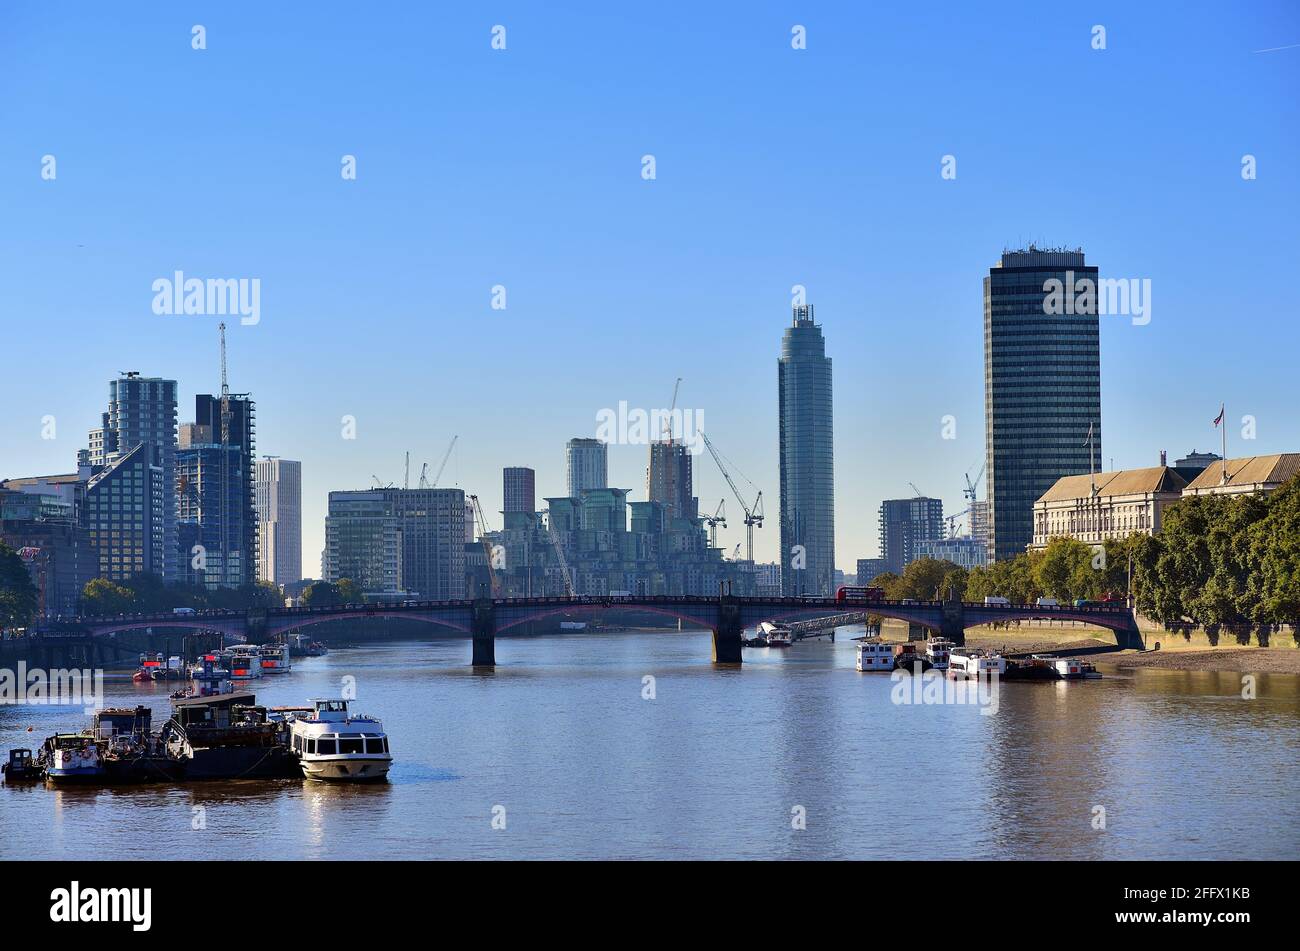 London, England, United Kingdom. The River Thames provides a foreground for the an expanding London skyline Stock Photo